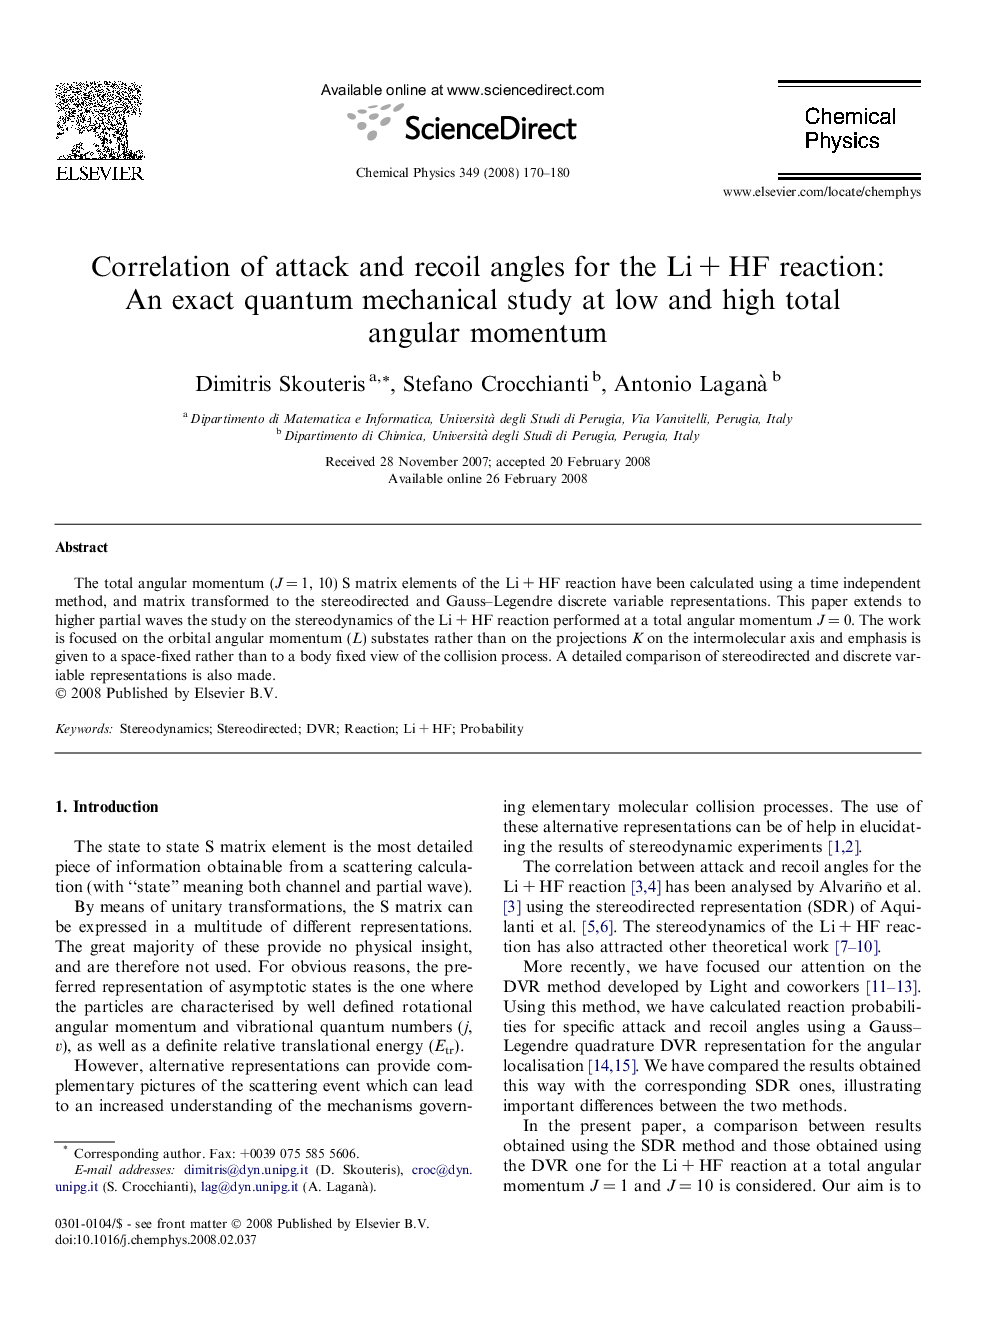 Correlation of attack and recoil angles for the LiÂ +Â HF reaction: An exact quantum mechanical study at low and high total angular momentum